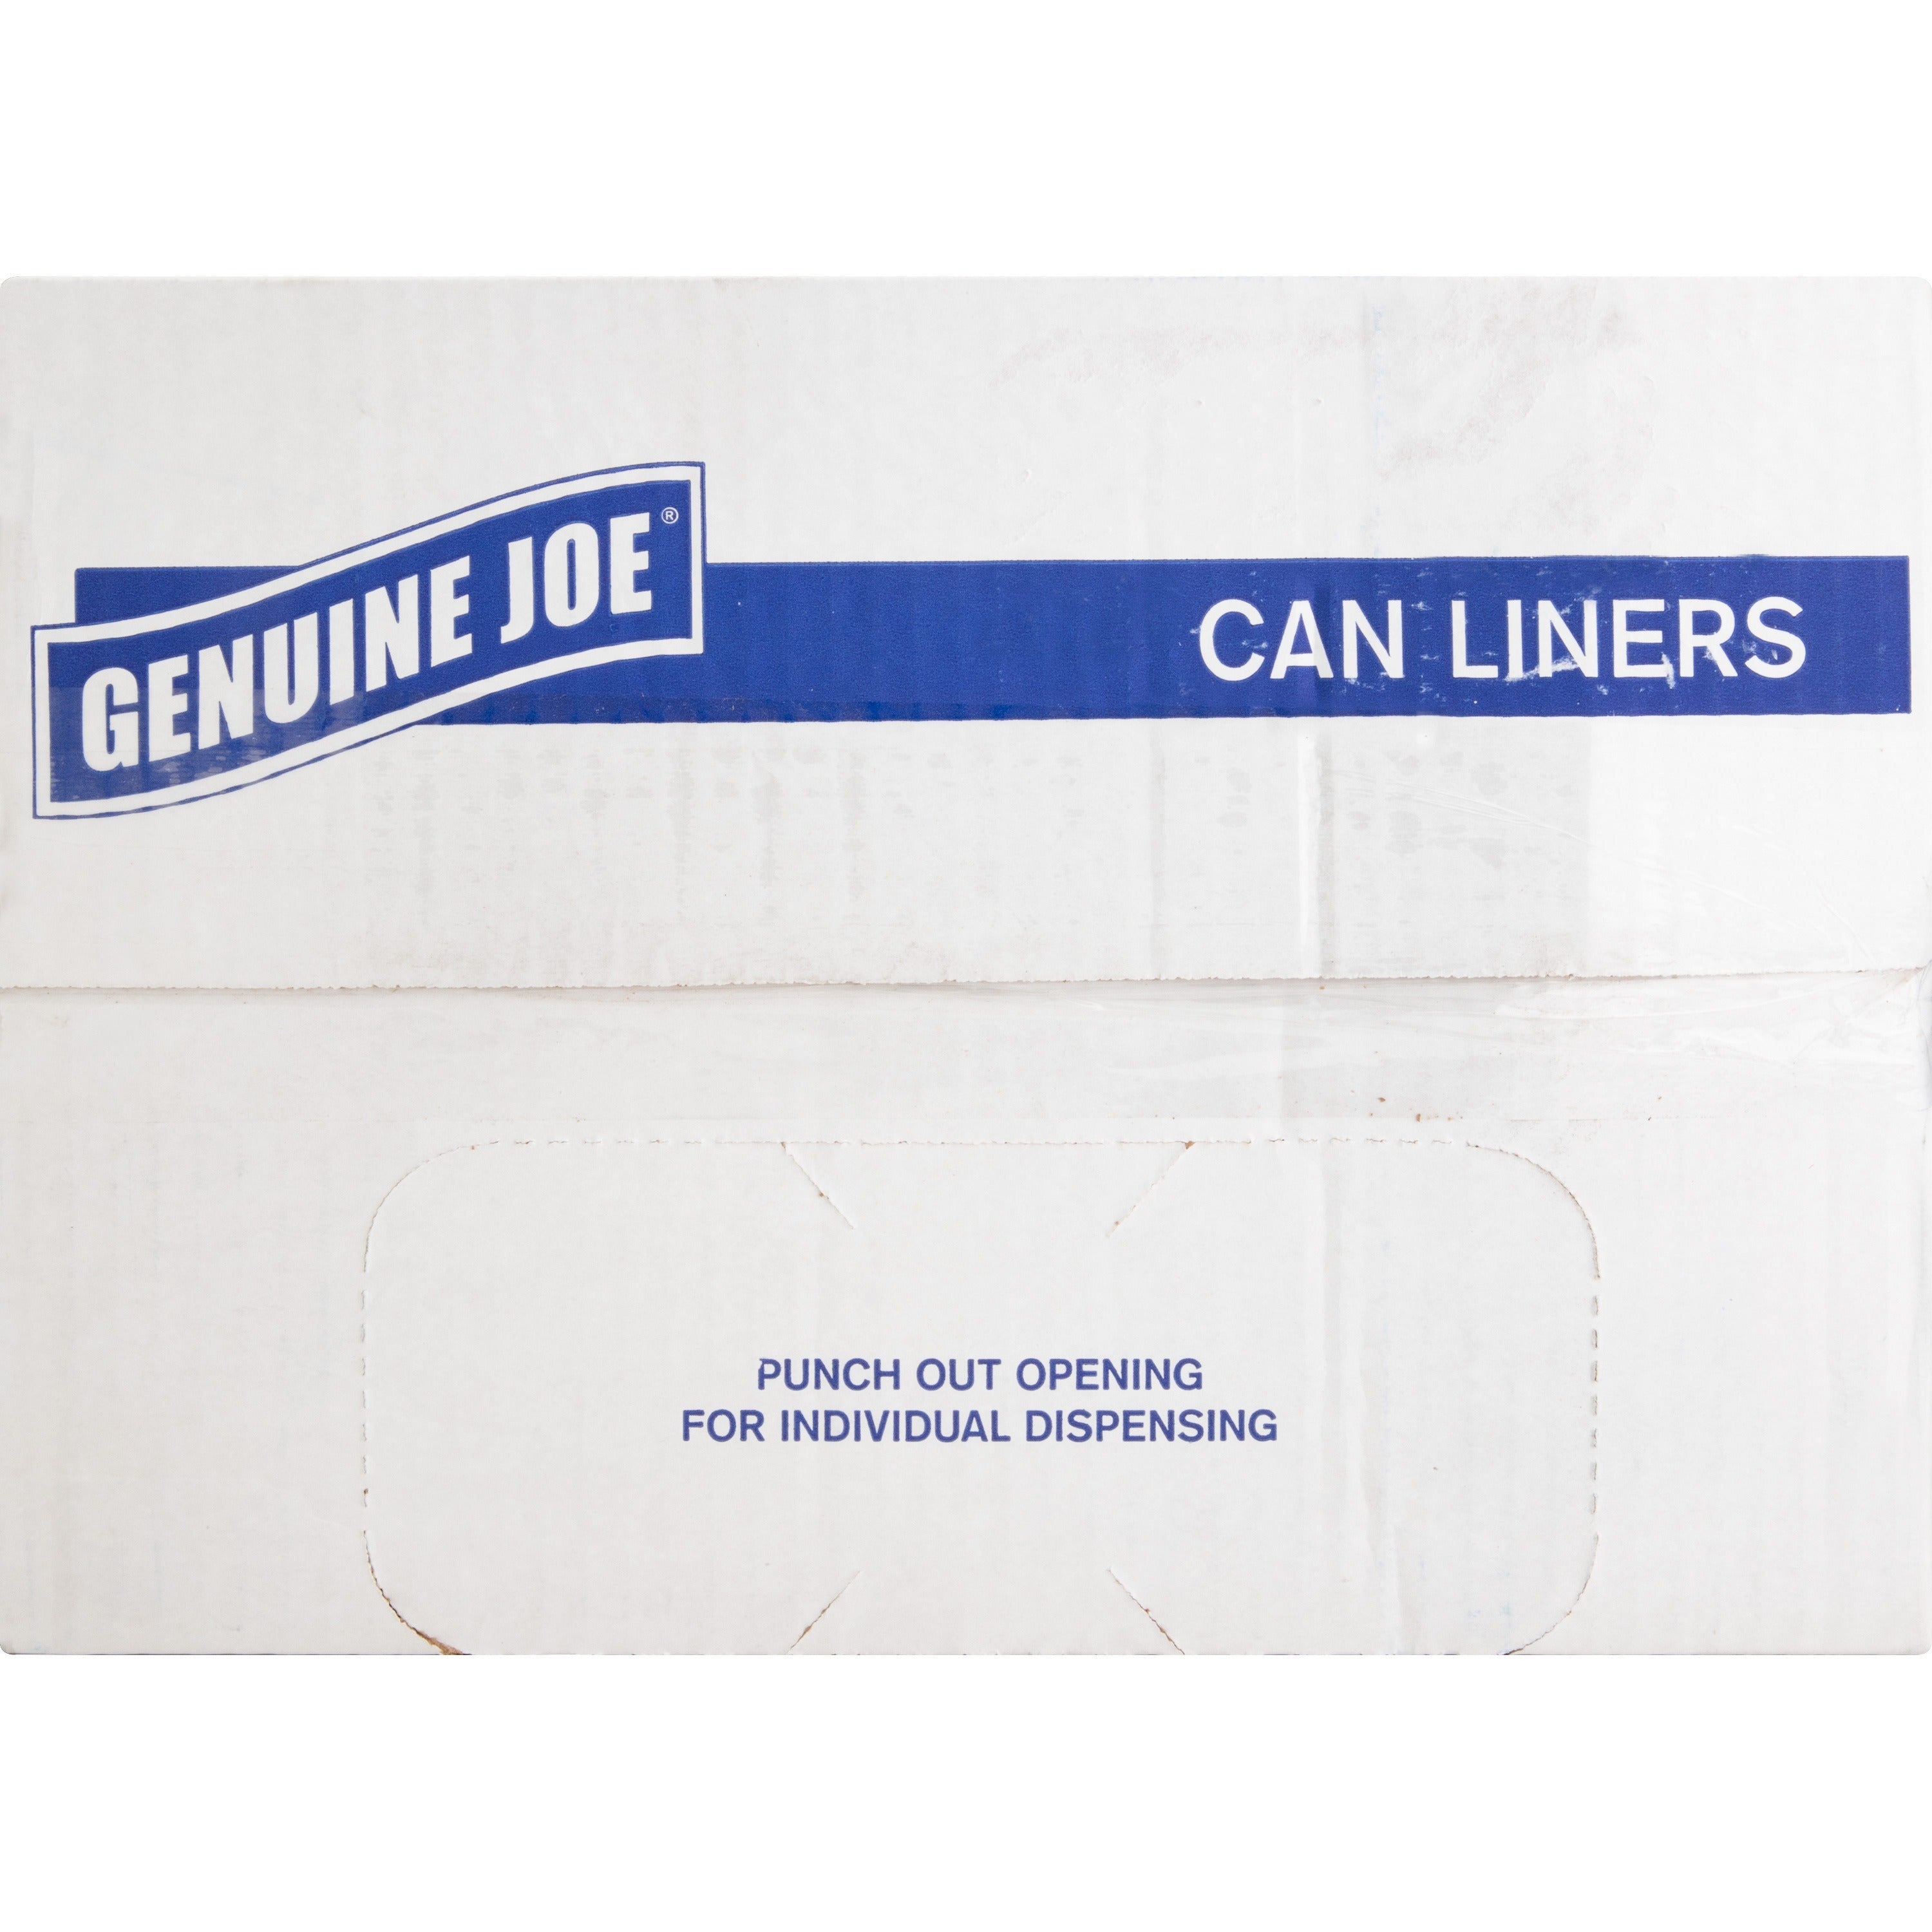 Genuine Joe Economy High-Density Can Liners - Small Size - 10 gal Capacity - 24" Width x 24" Length - 0.24 mil (6 Micron) Thickness - High Density - Translucent - Resin - 1000/Carton - Breakroom, Restroom, Office Waste, Can - 